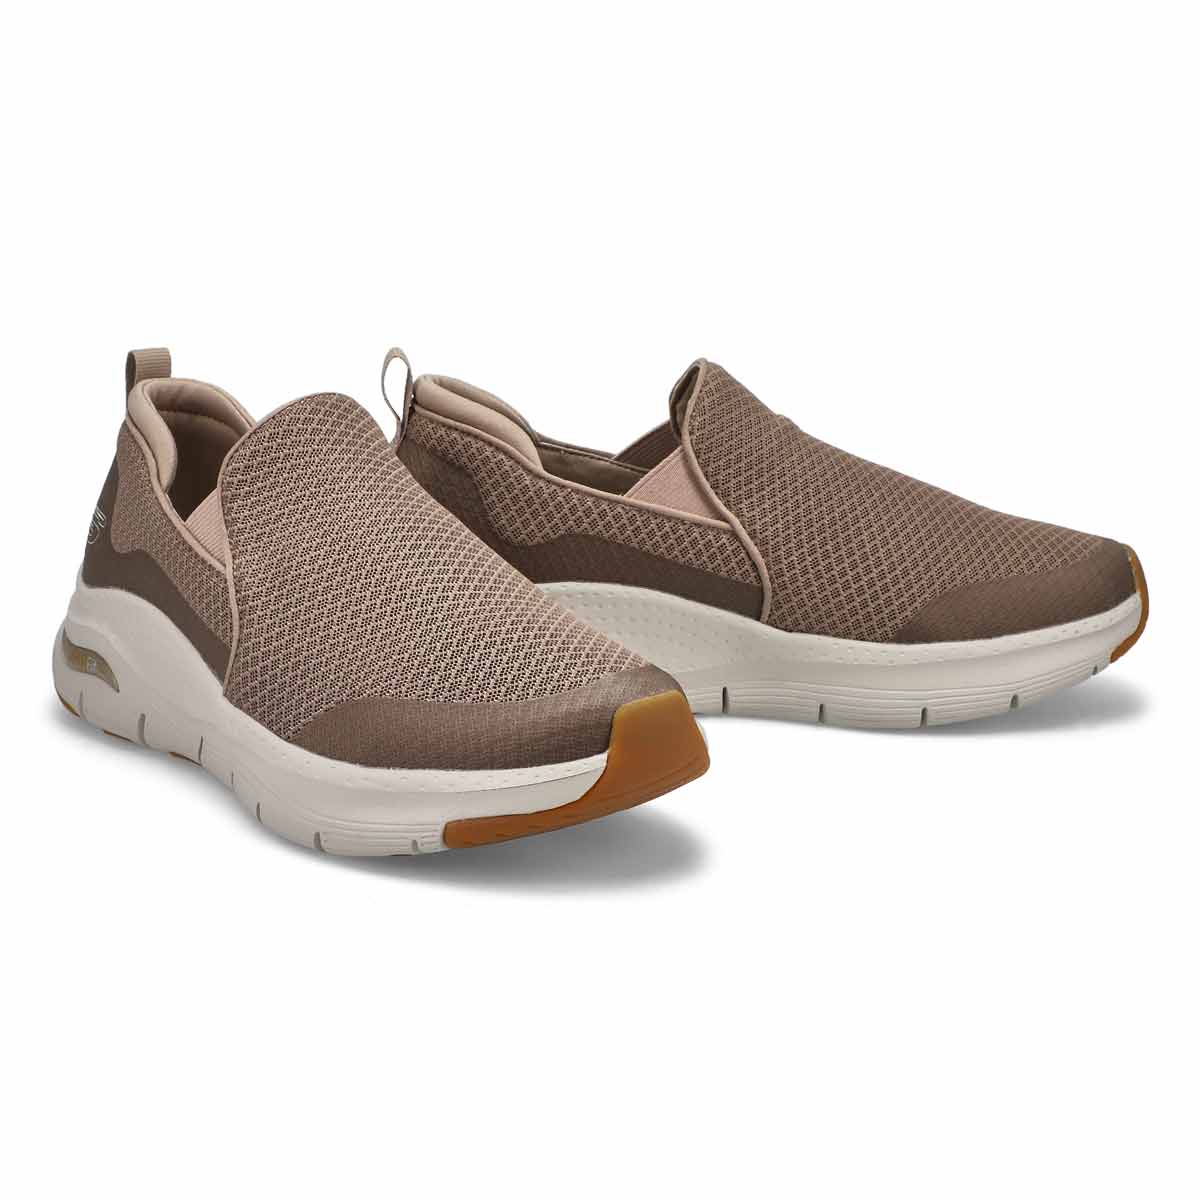 Men's Arch Fit Banlin Slip On Sneaker - Taupe